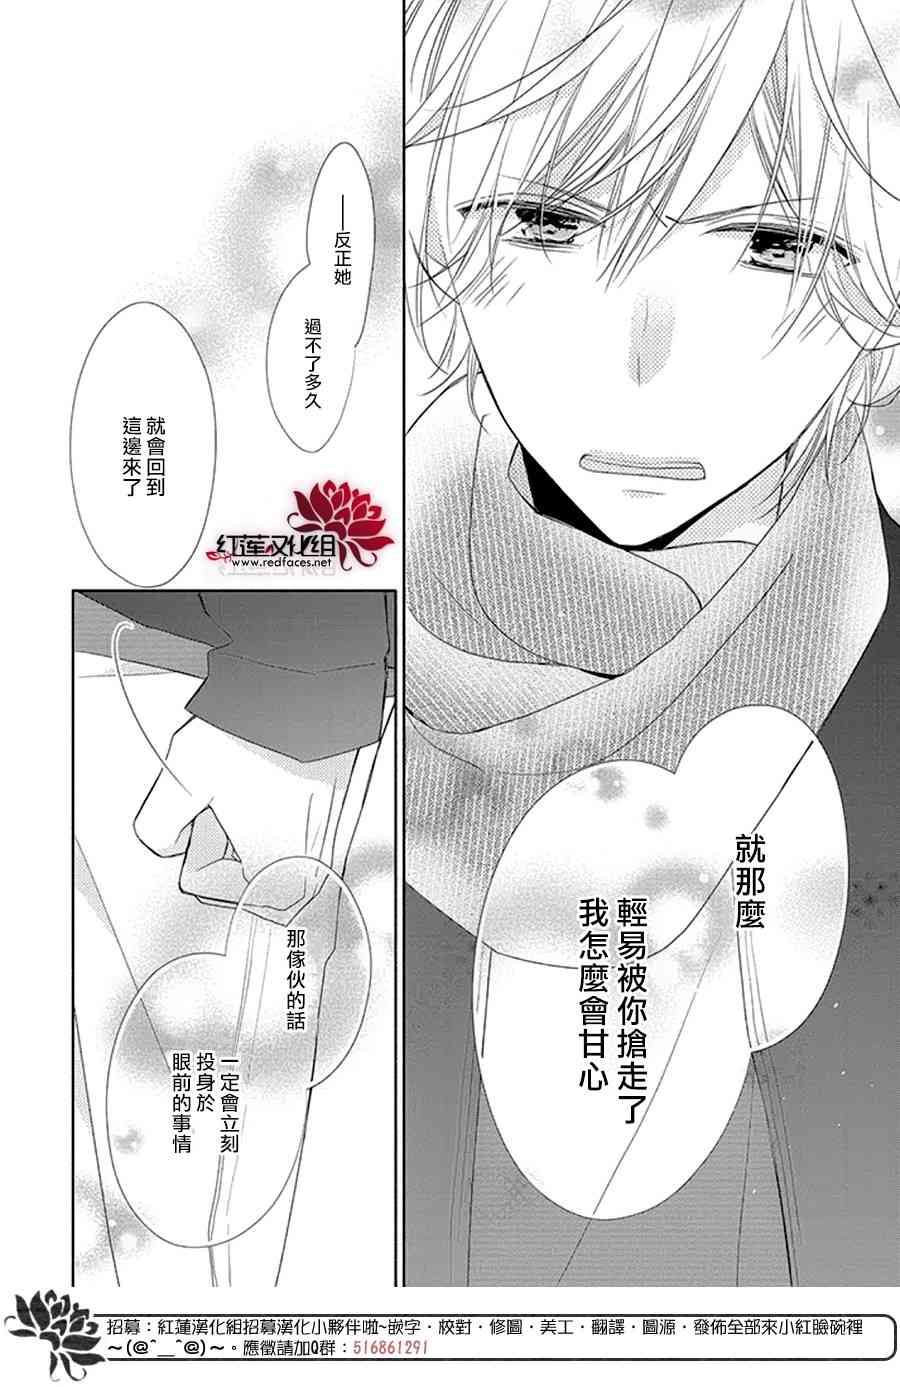 If given a second chance - 19話 - 4